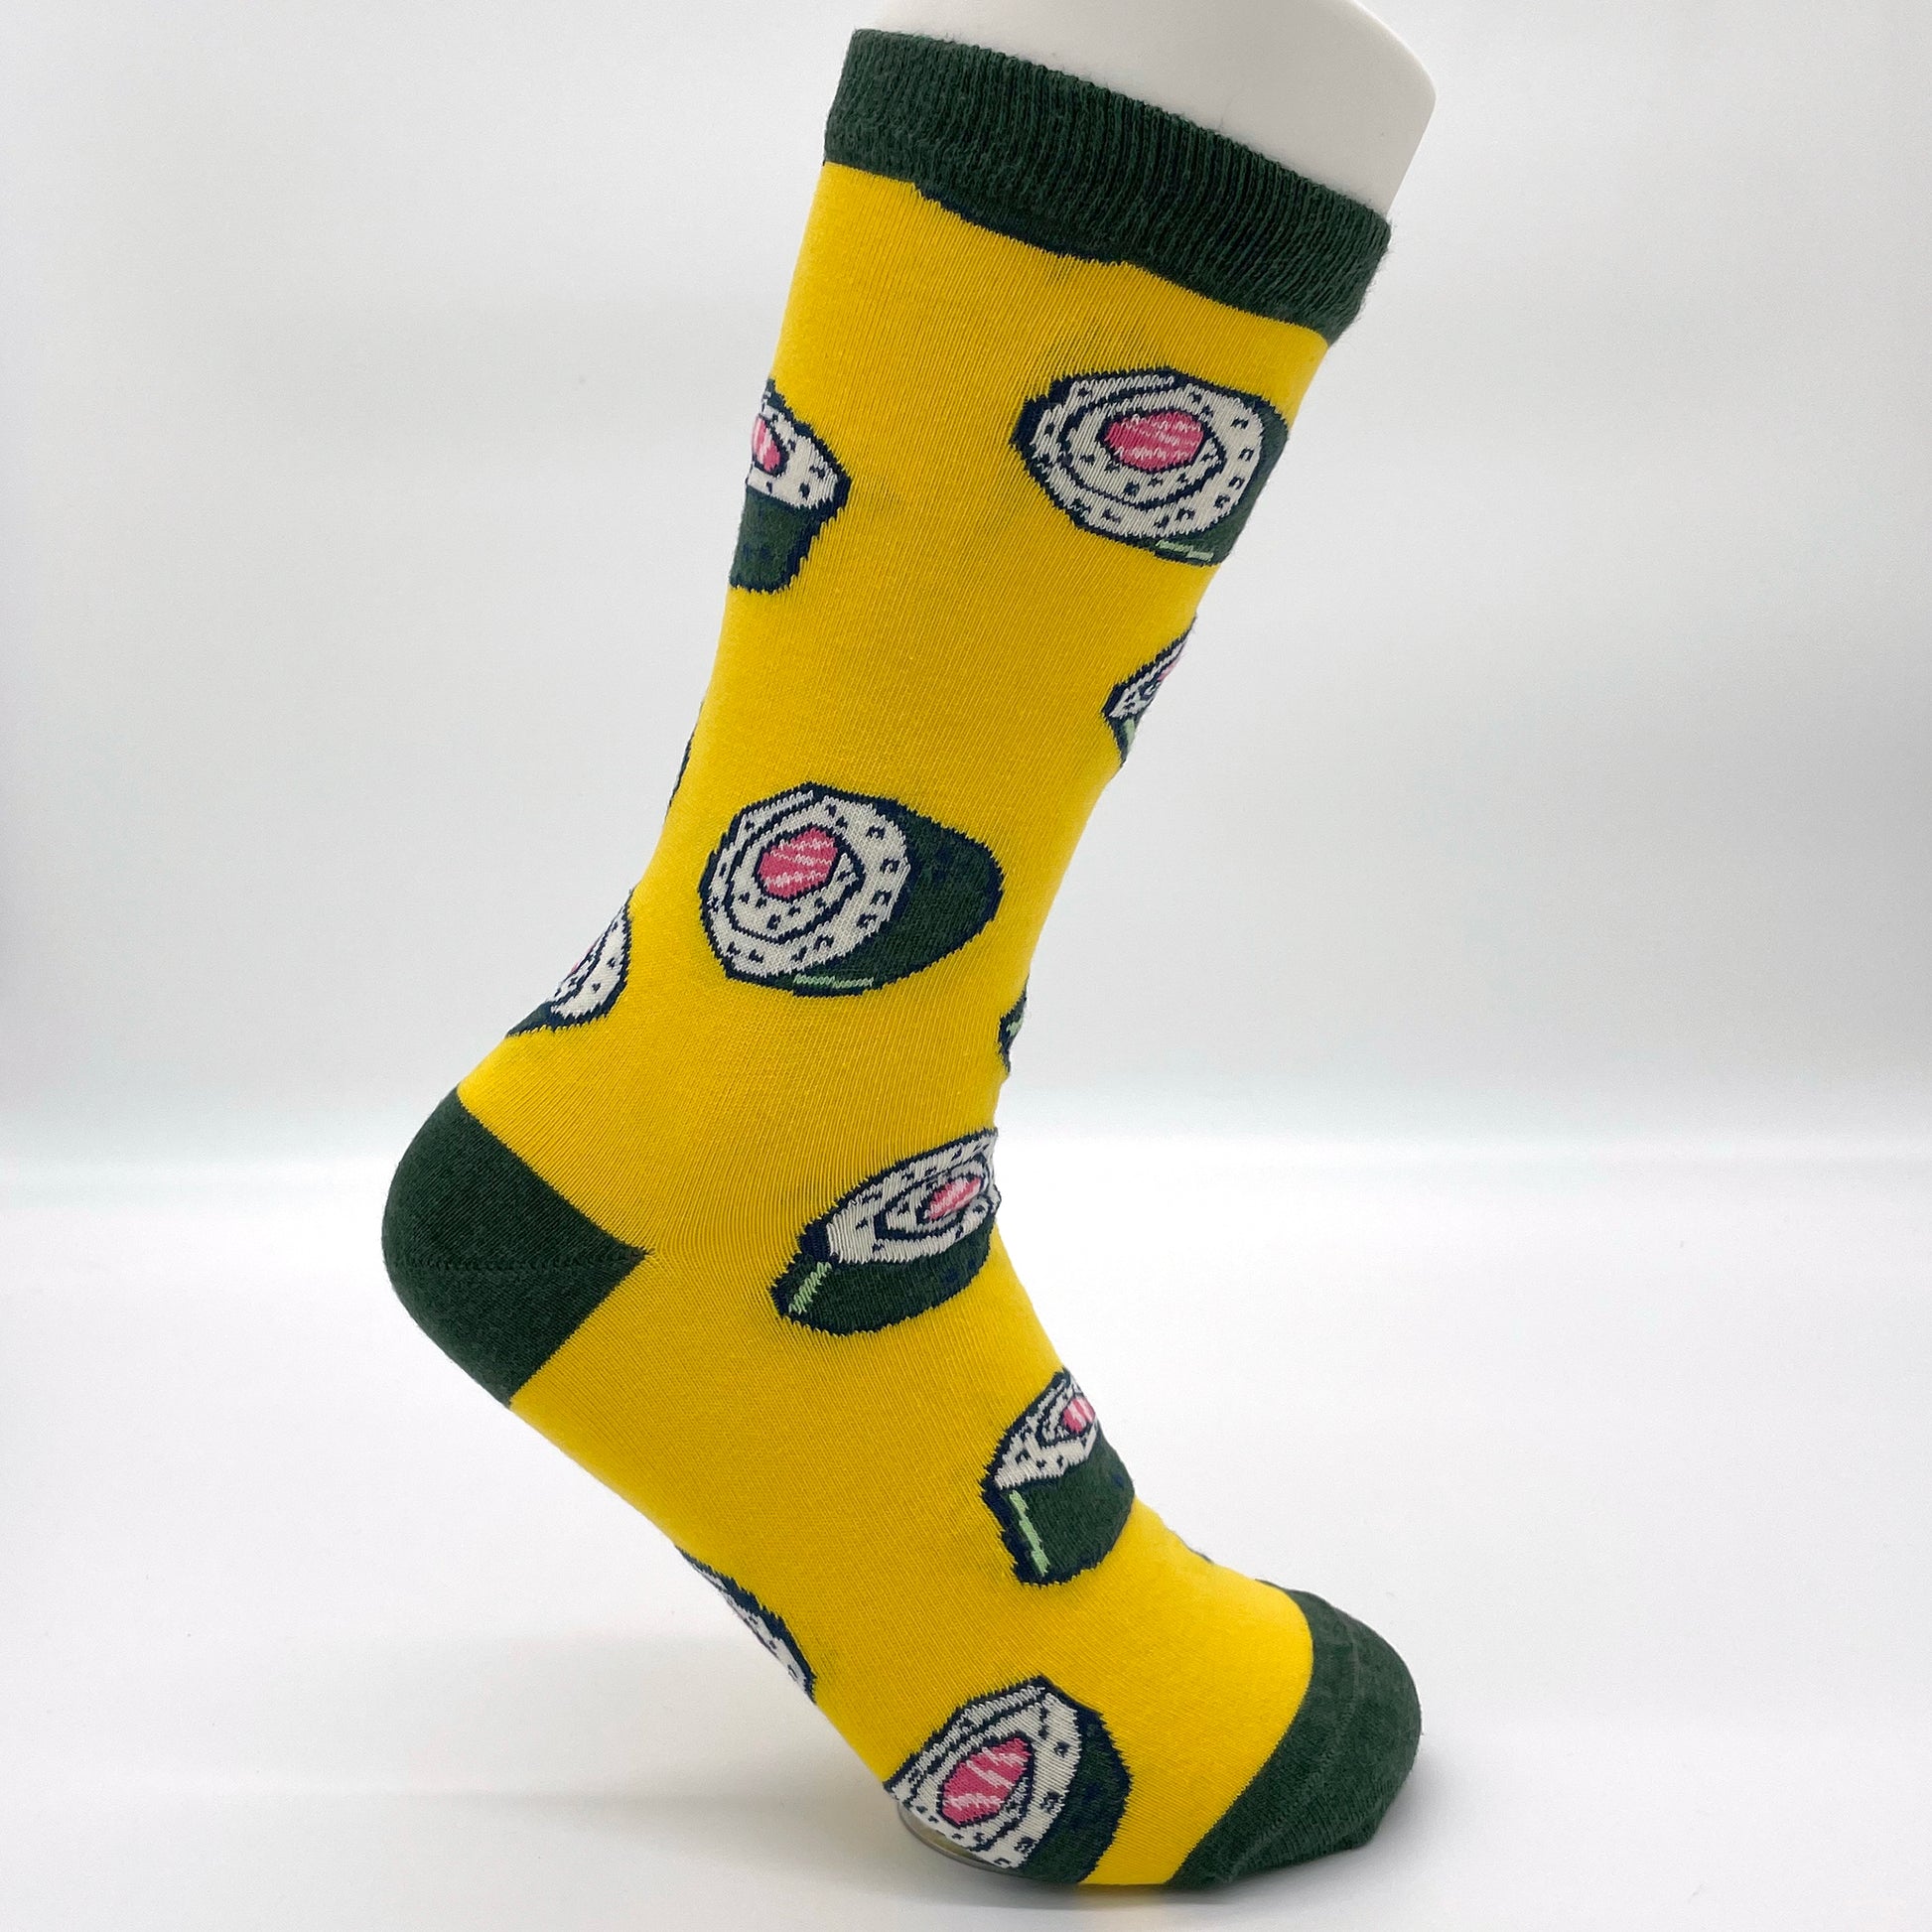 A white sock mannequin sports a yellow sock patterned with sushi rolls. The welt, heel and toe of the sock are all dark green.